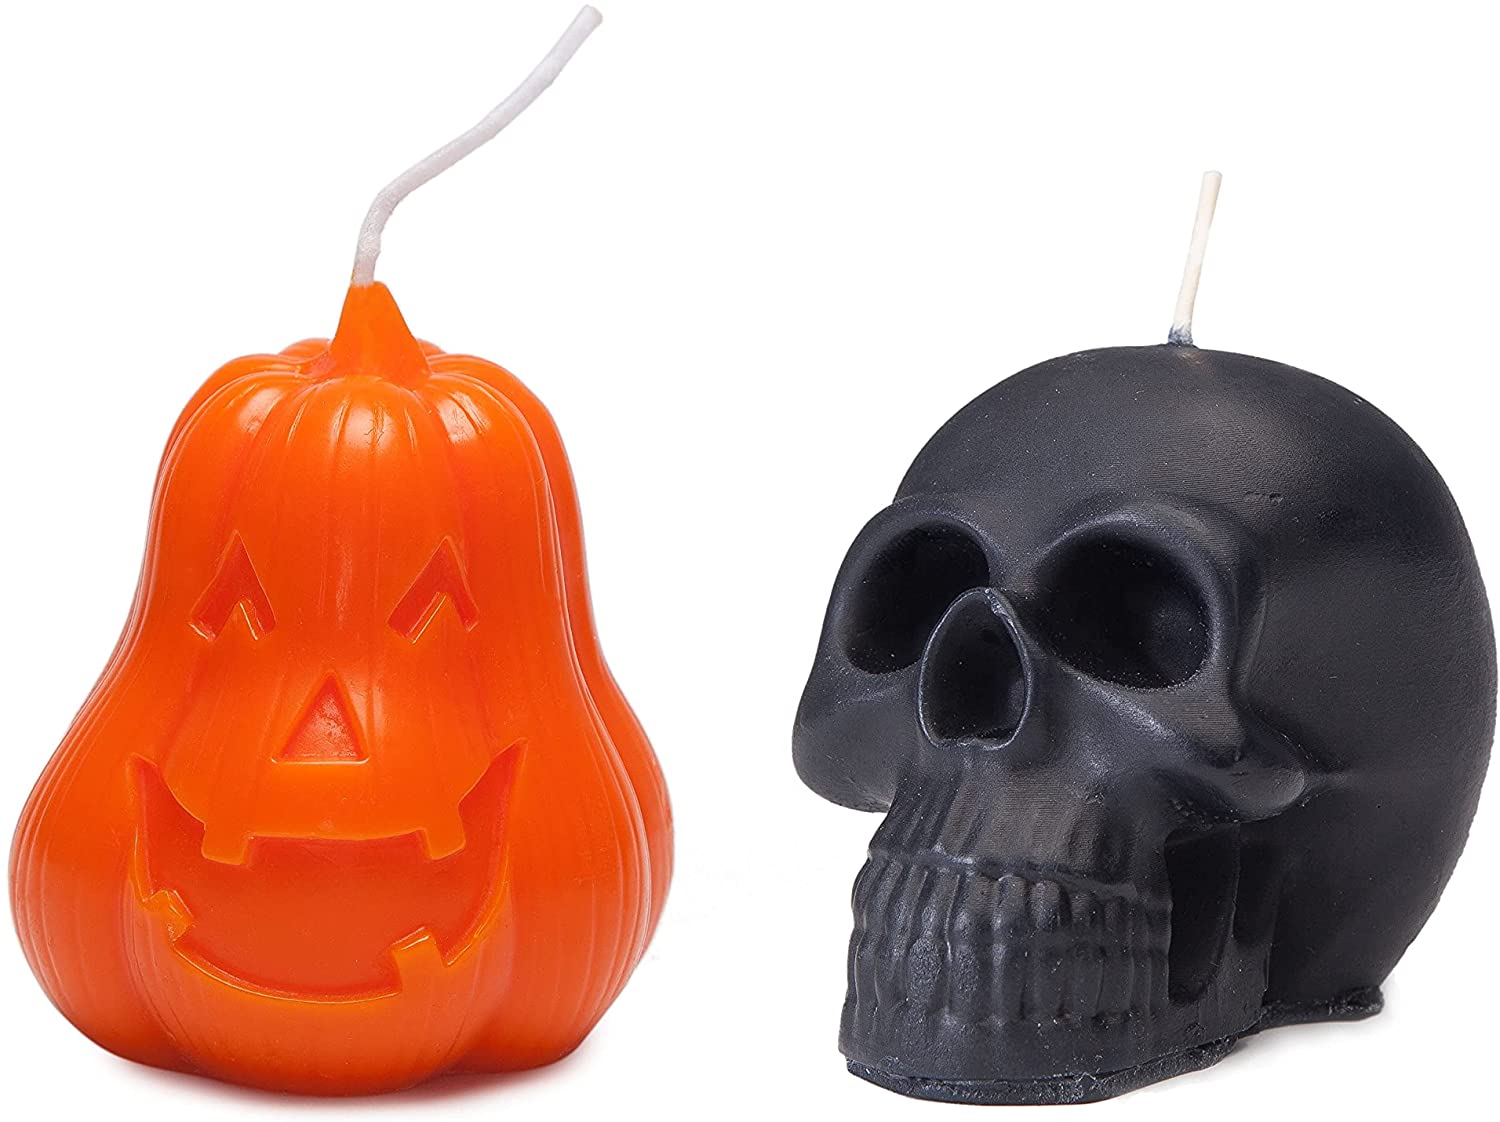 Halloween Candles 2 pack now 50% off on Amazon!